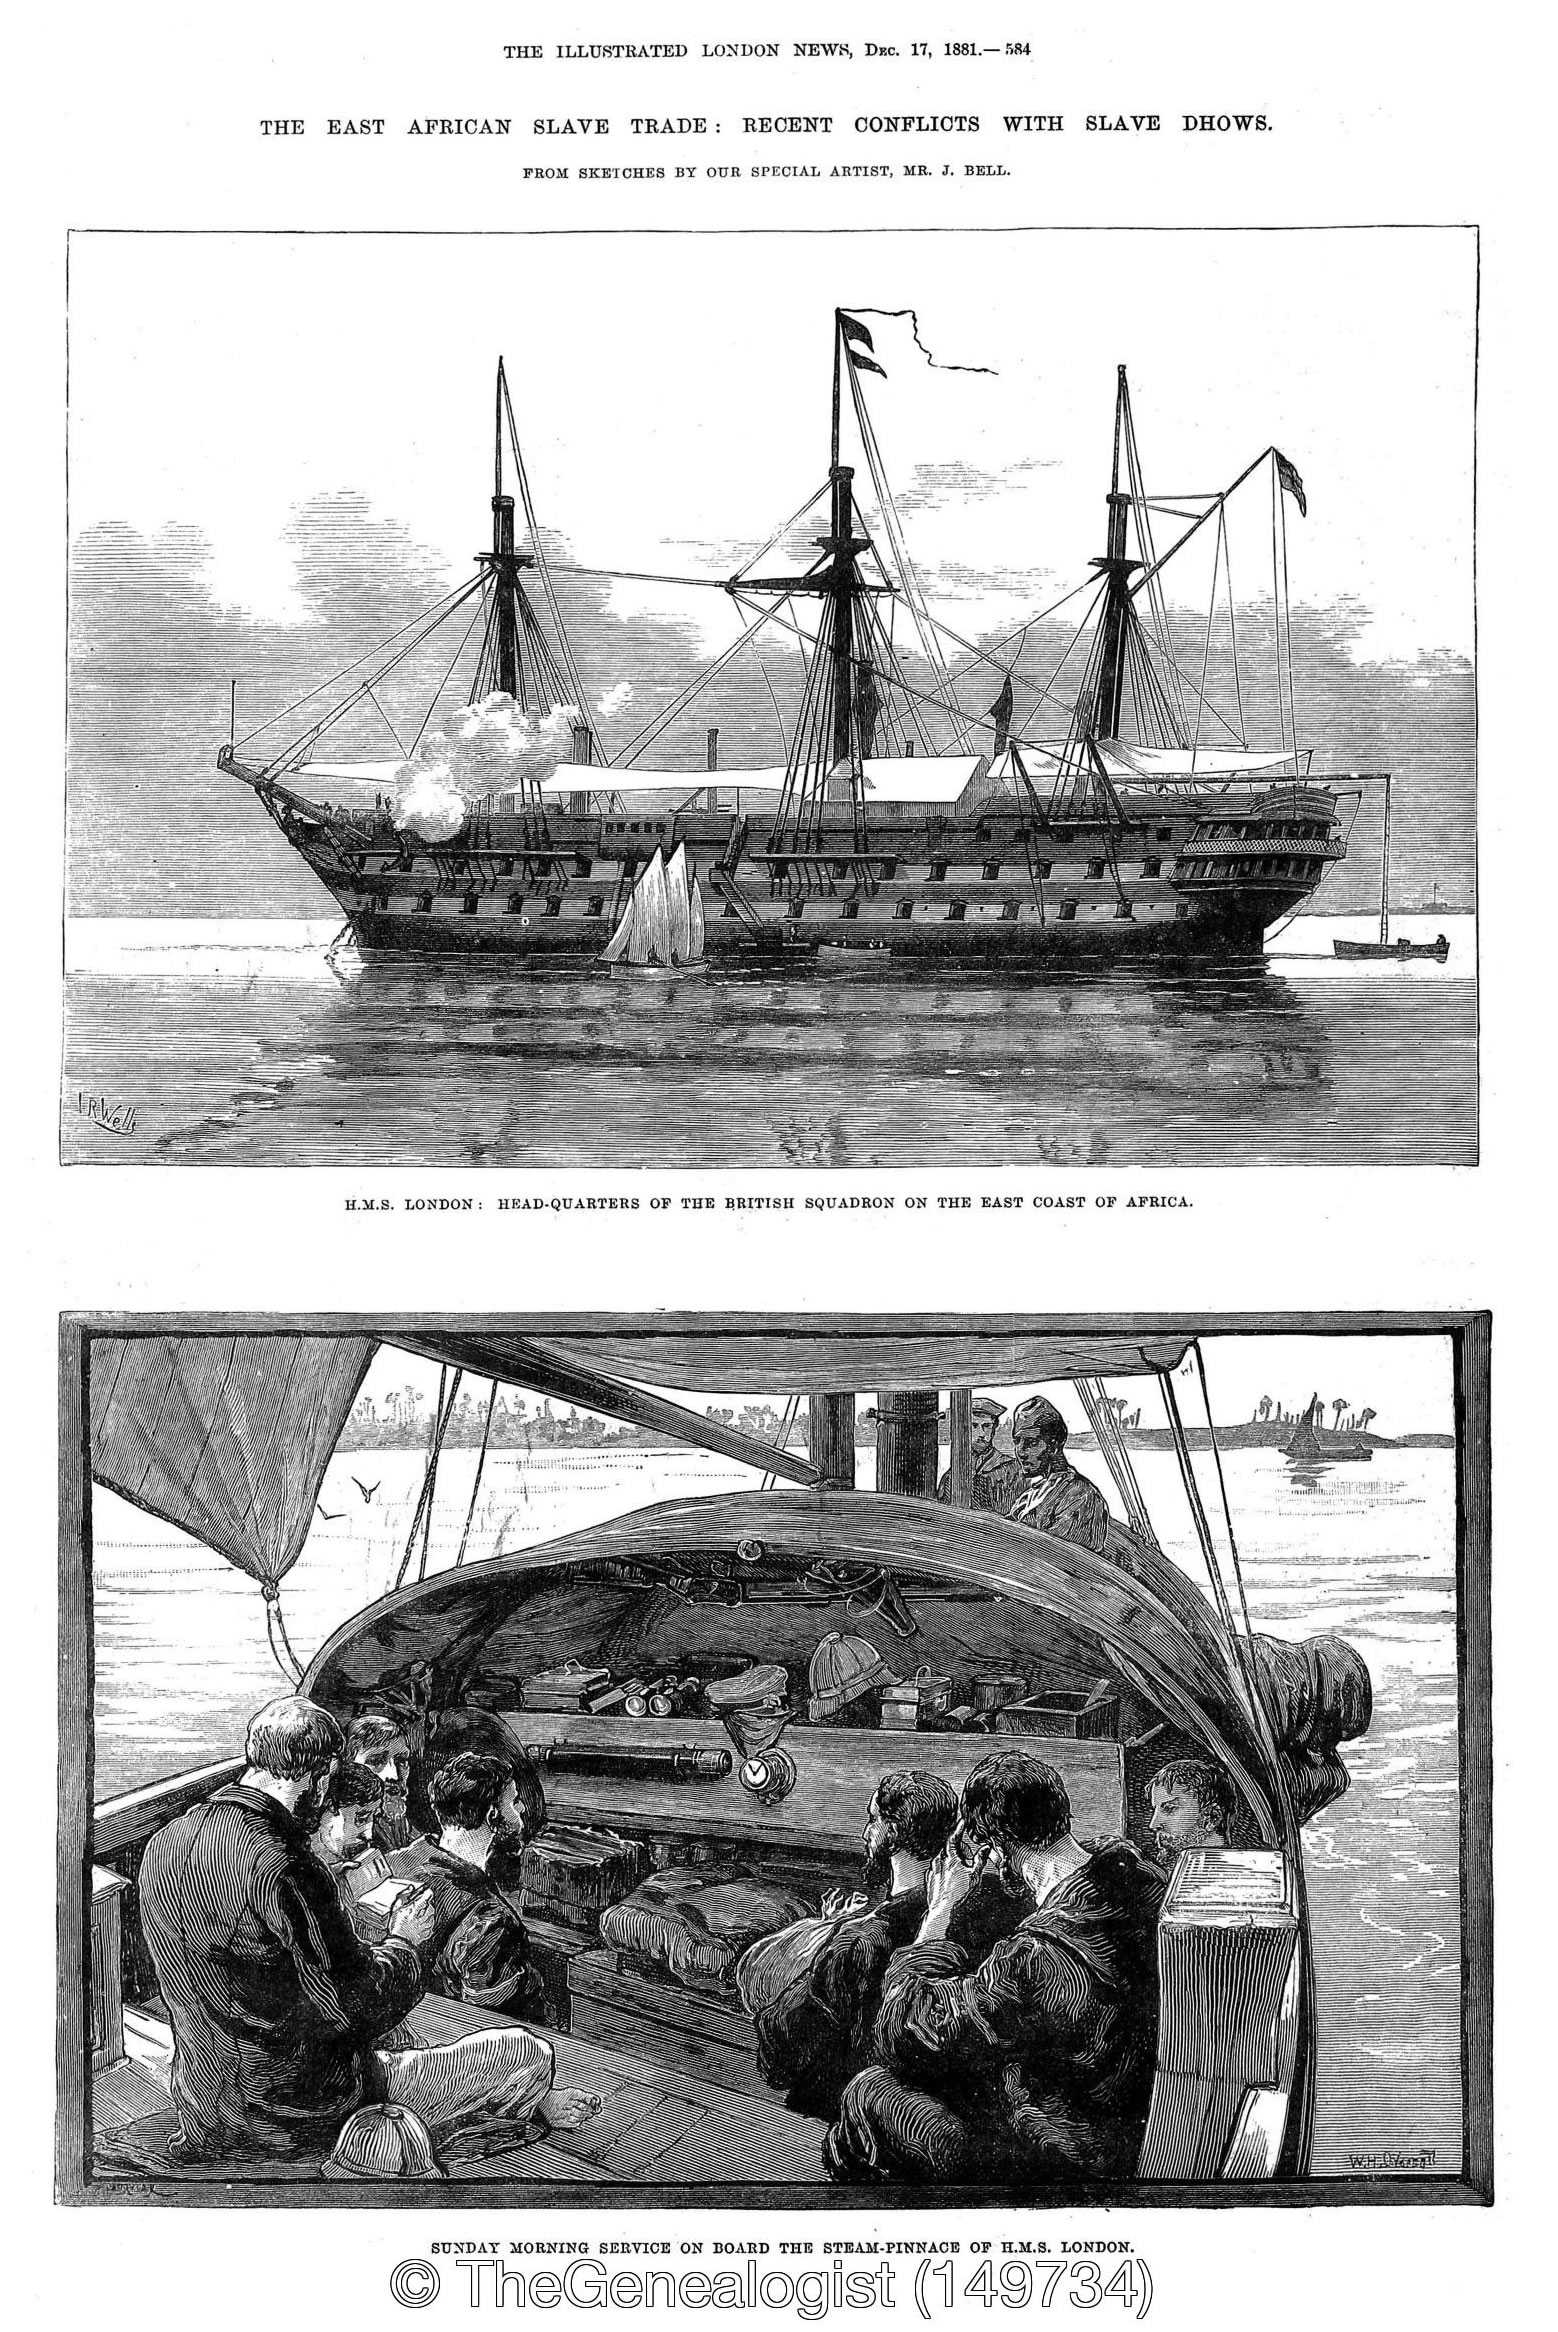 The Illustrated London News December 17th 1881 from TheGenealogist's Newspapers & Magazine Collection